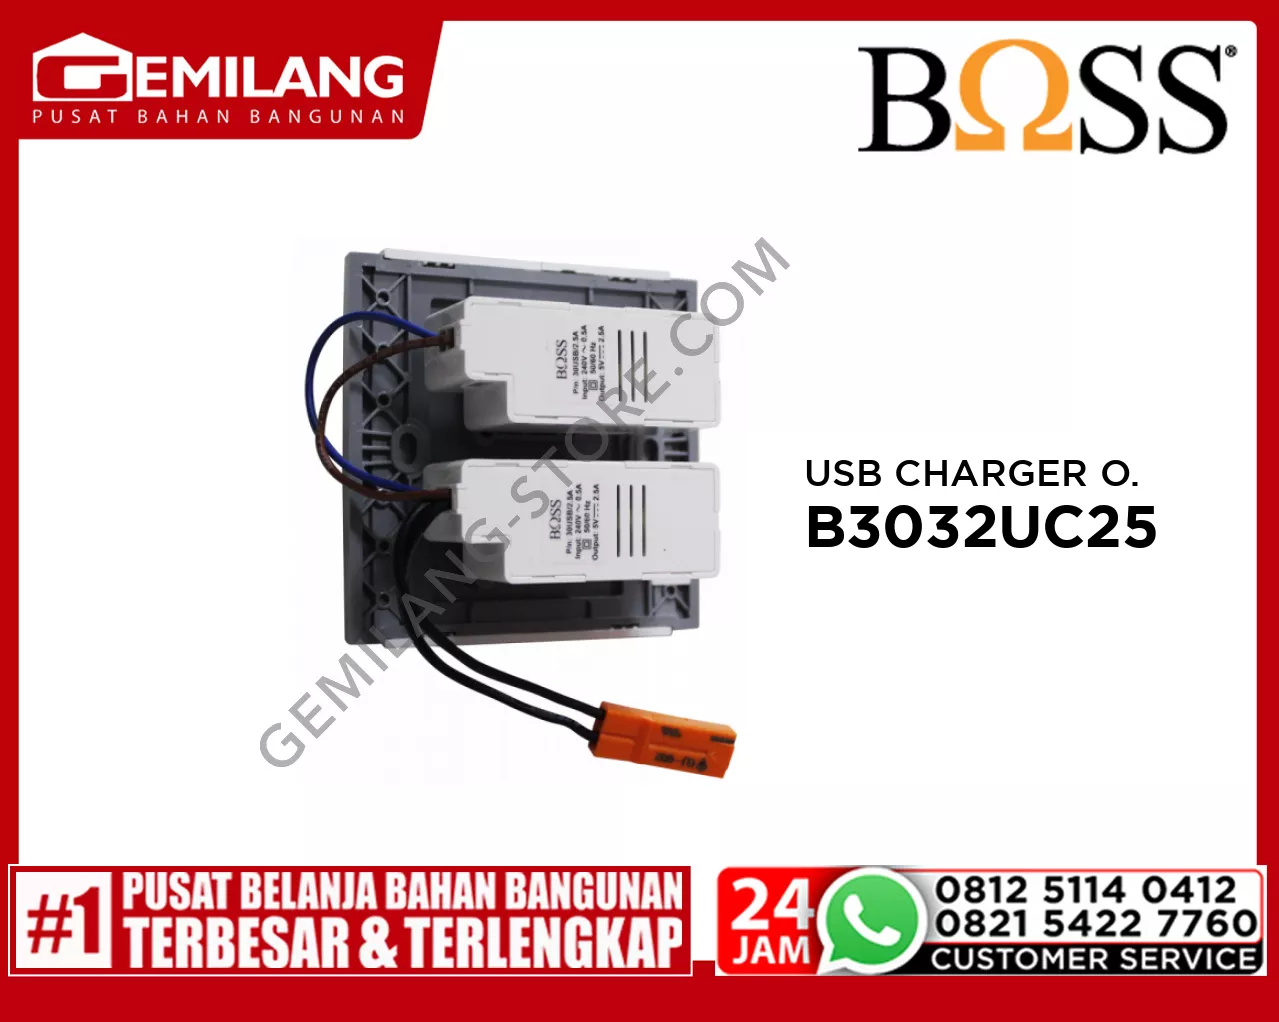 BOSS USB CHARGER OUTLET B3000 LUMIO 2 GANG 5v 2.5A W/SCREW TERMINALS B3032UC25 GS